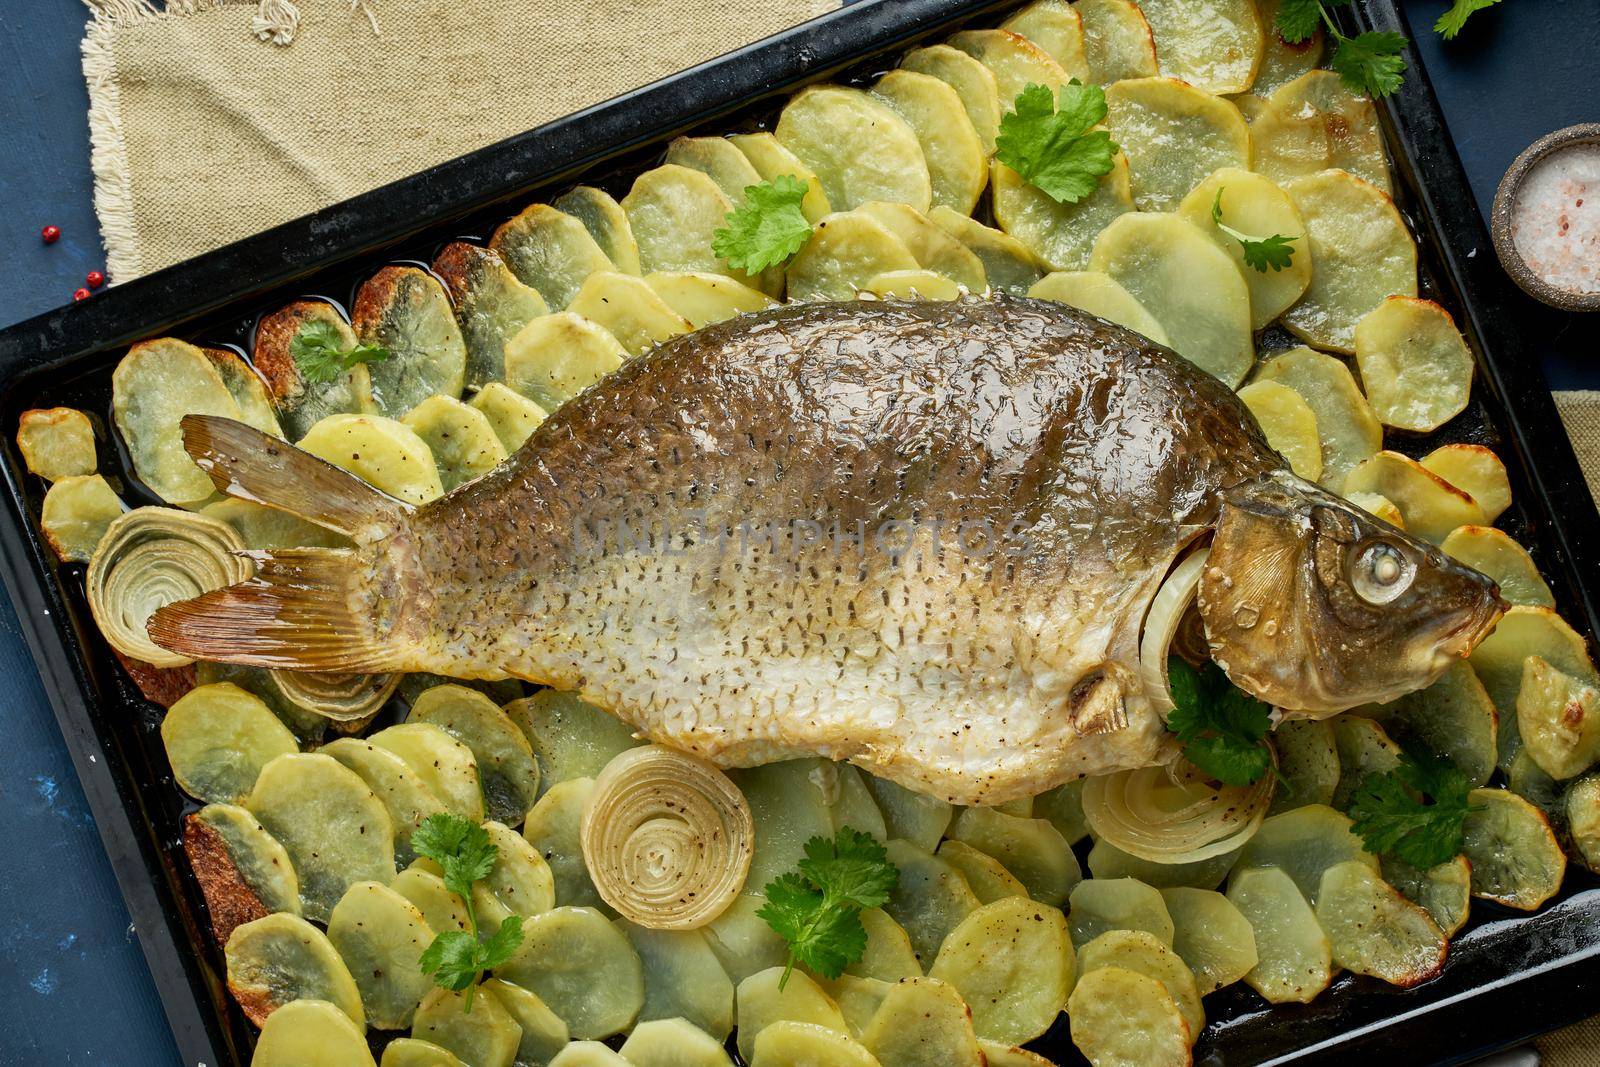 Baked carp, whole fish from the oven with sliced potatoes on a large tray. Traditional European Polish dish, suitable for a Christmas table, top view, close up